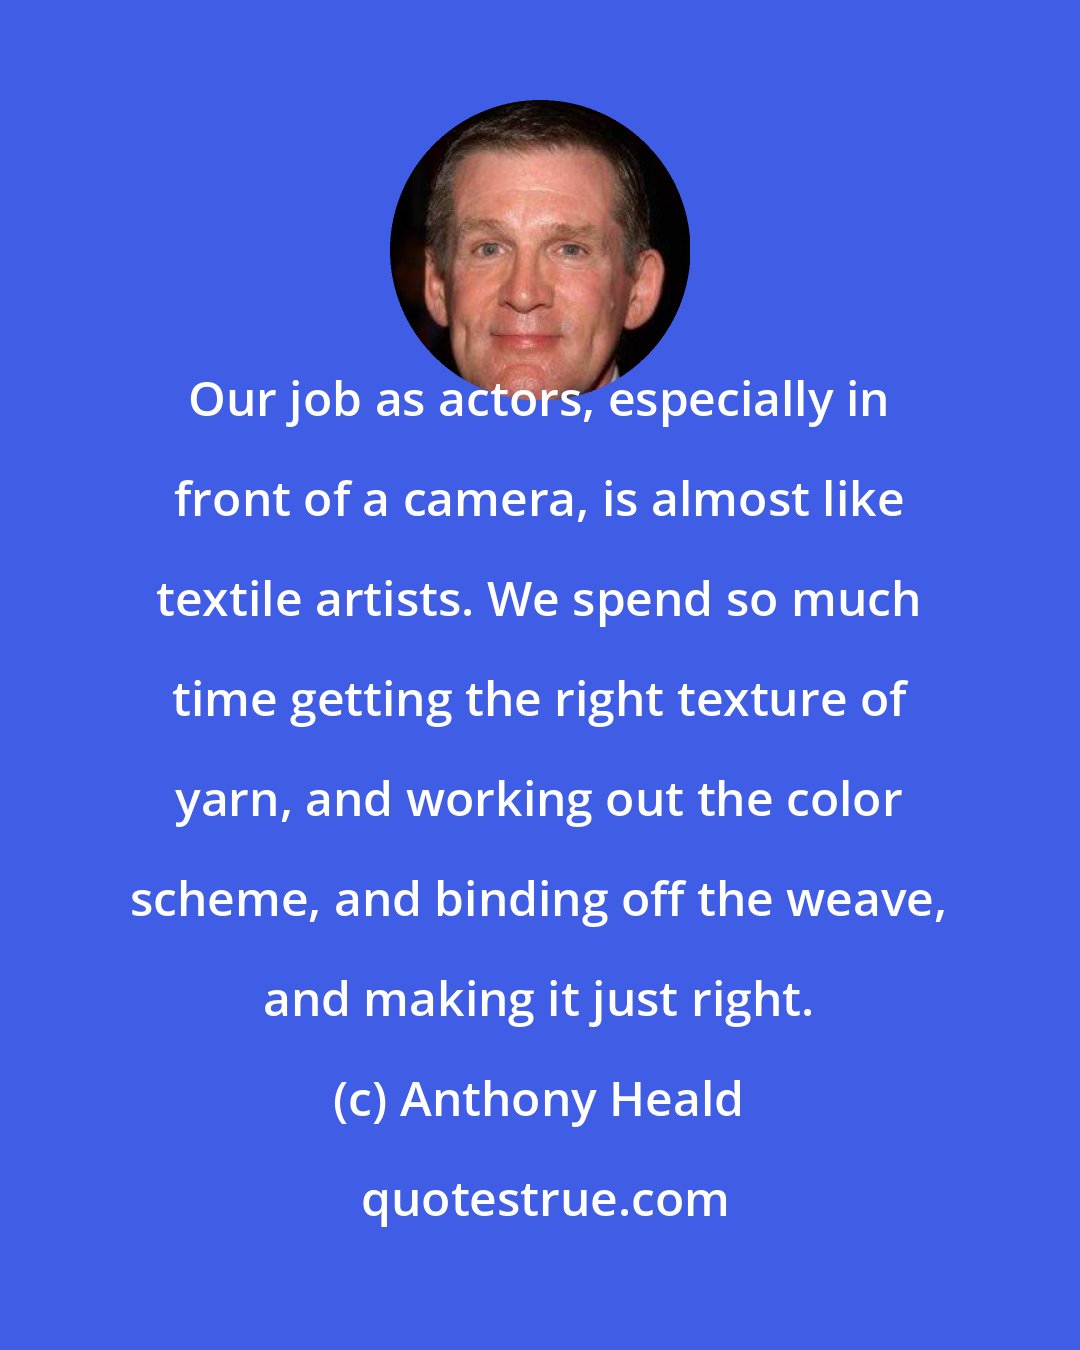 Anthony Heald: Our job as actors, especially in front of a camera, is almost like textile artists. We spend so much time getting the right texture of yarn, and working out the color scheme, and binding off the weave, and making it just right.